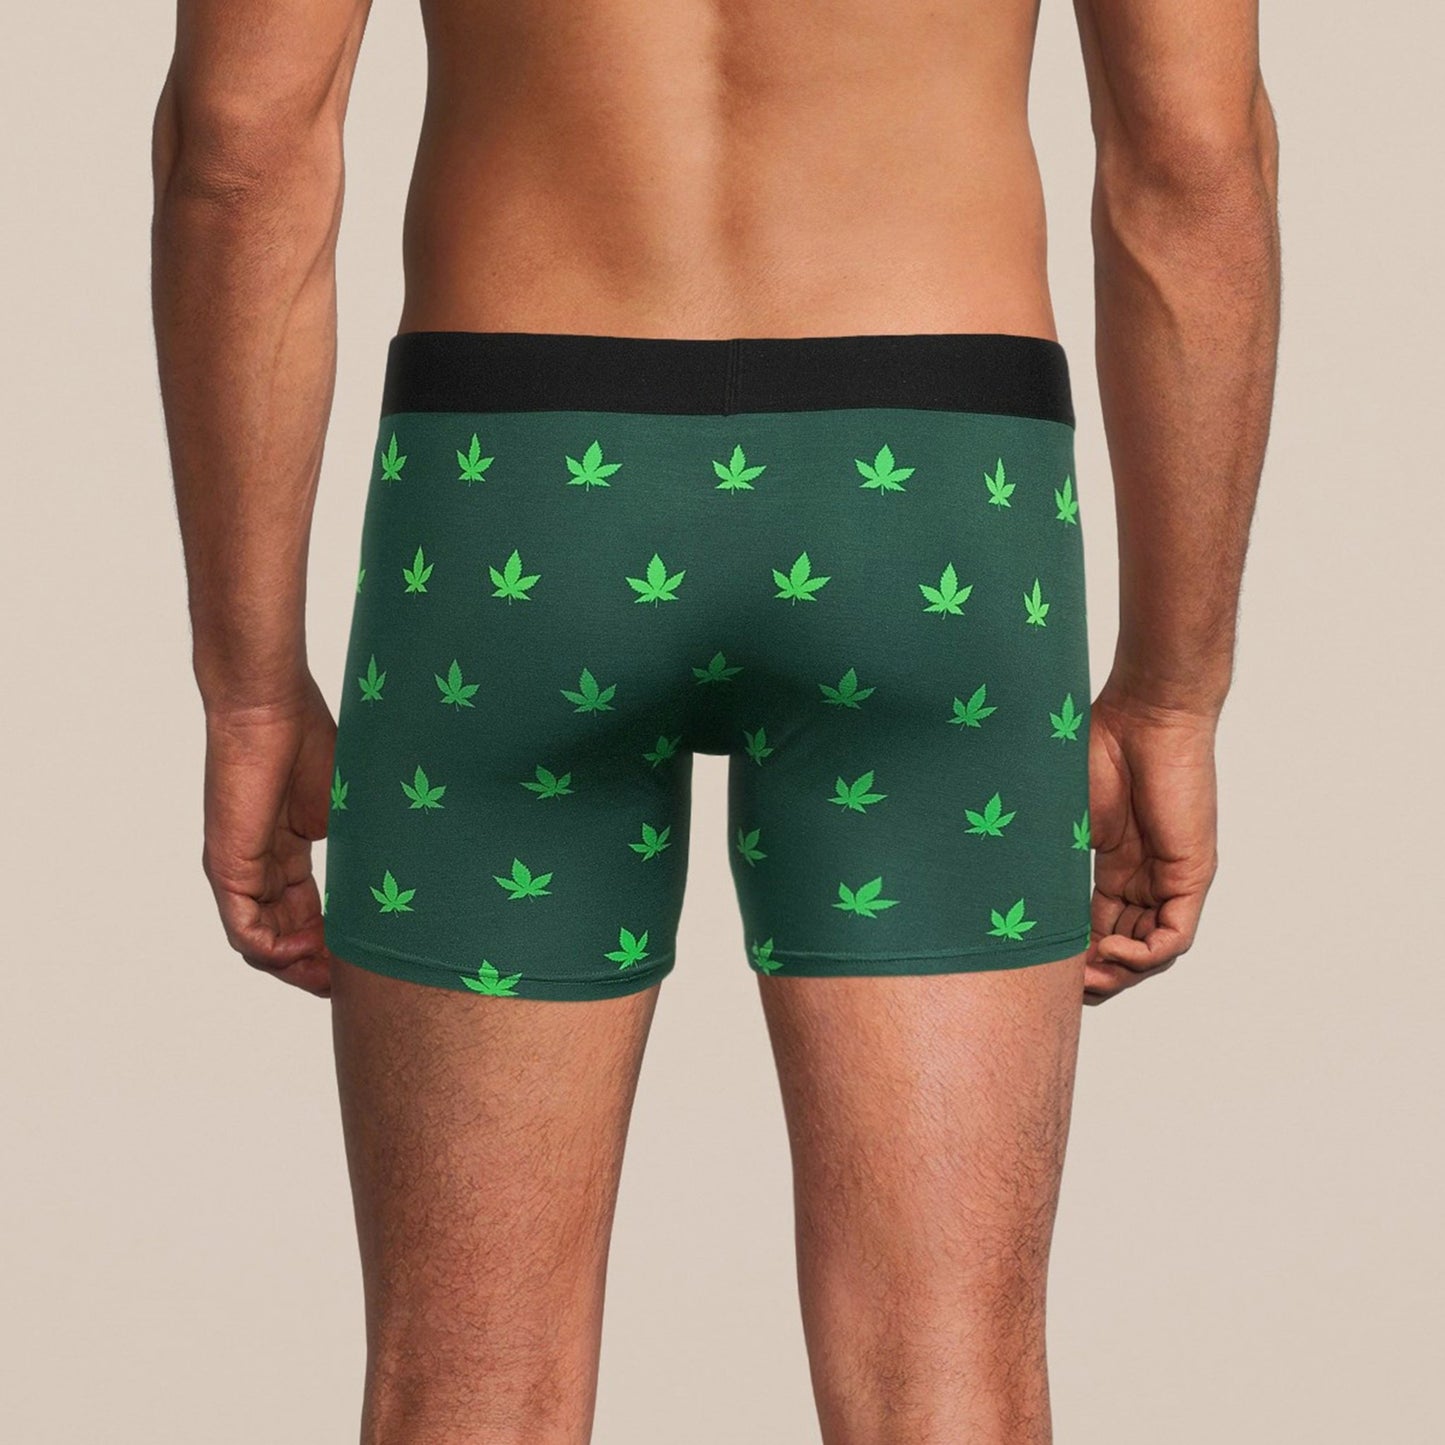 Men's Weed Boxer Trunks Underwear with Pouch - MANBUNS Underwear & Socks Free Shipping